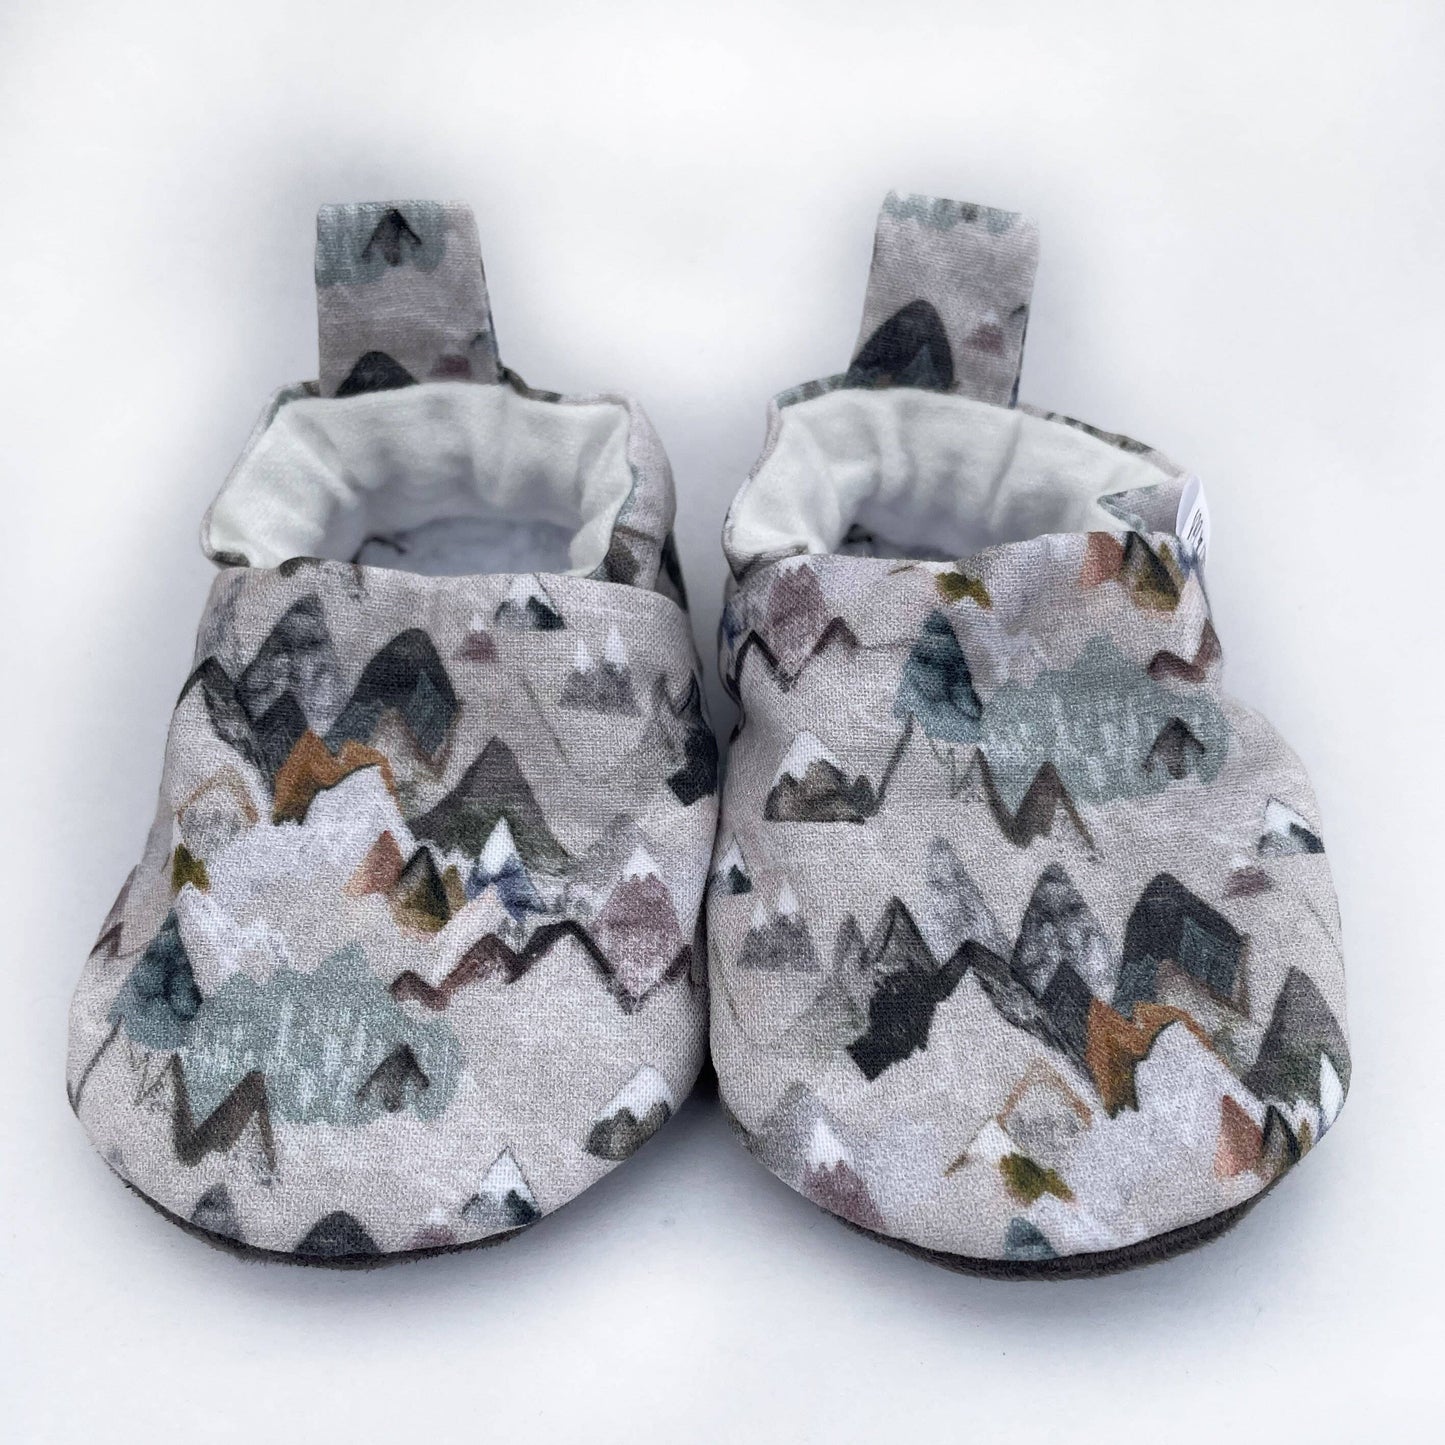 Earthy Mountain Baby Shoes: Rubber w/toe guard / 12-18 months